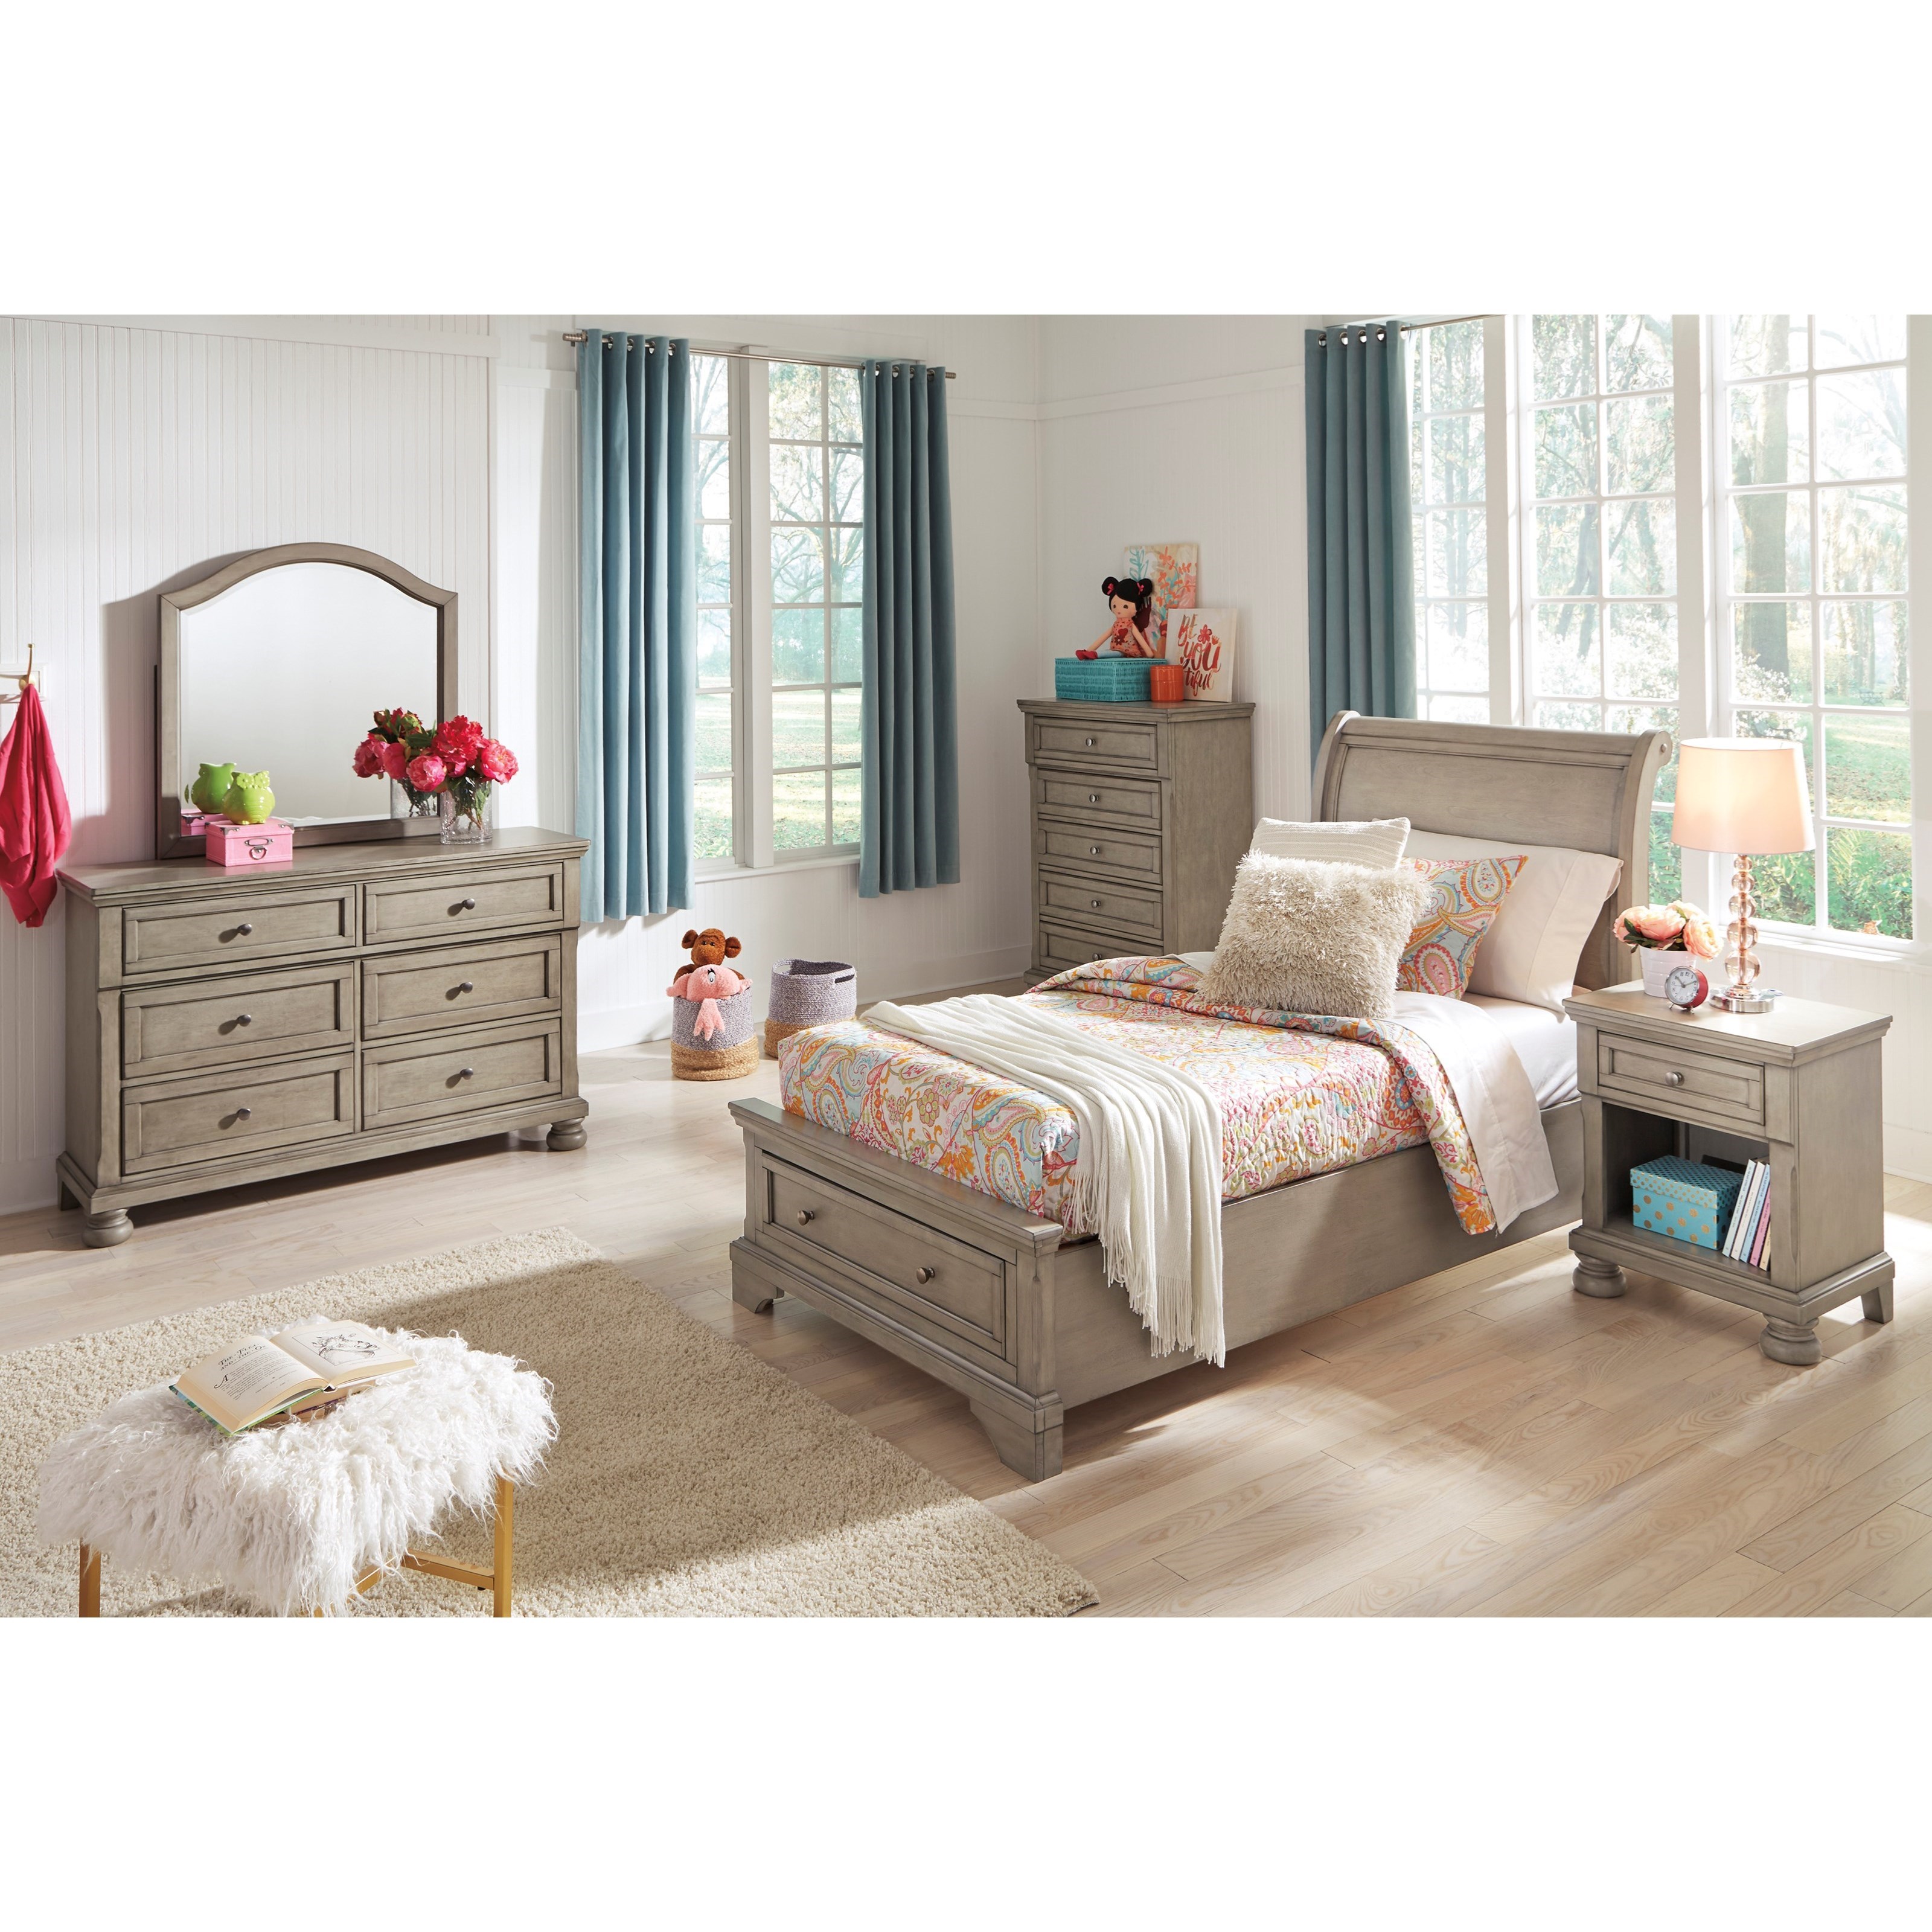 ashley twin bed sets